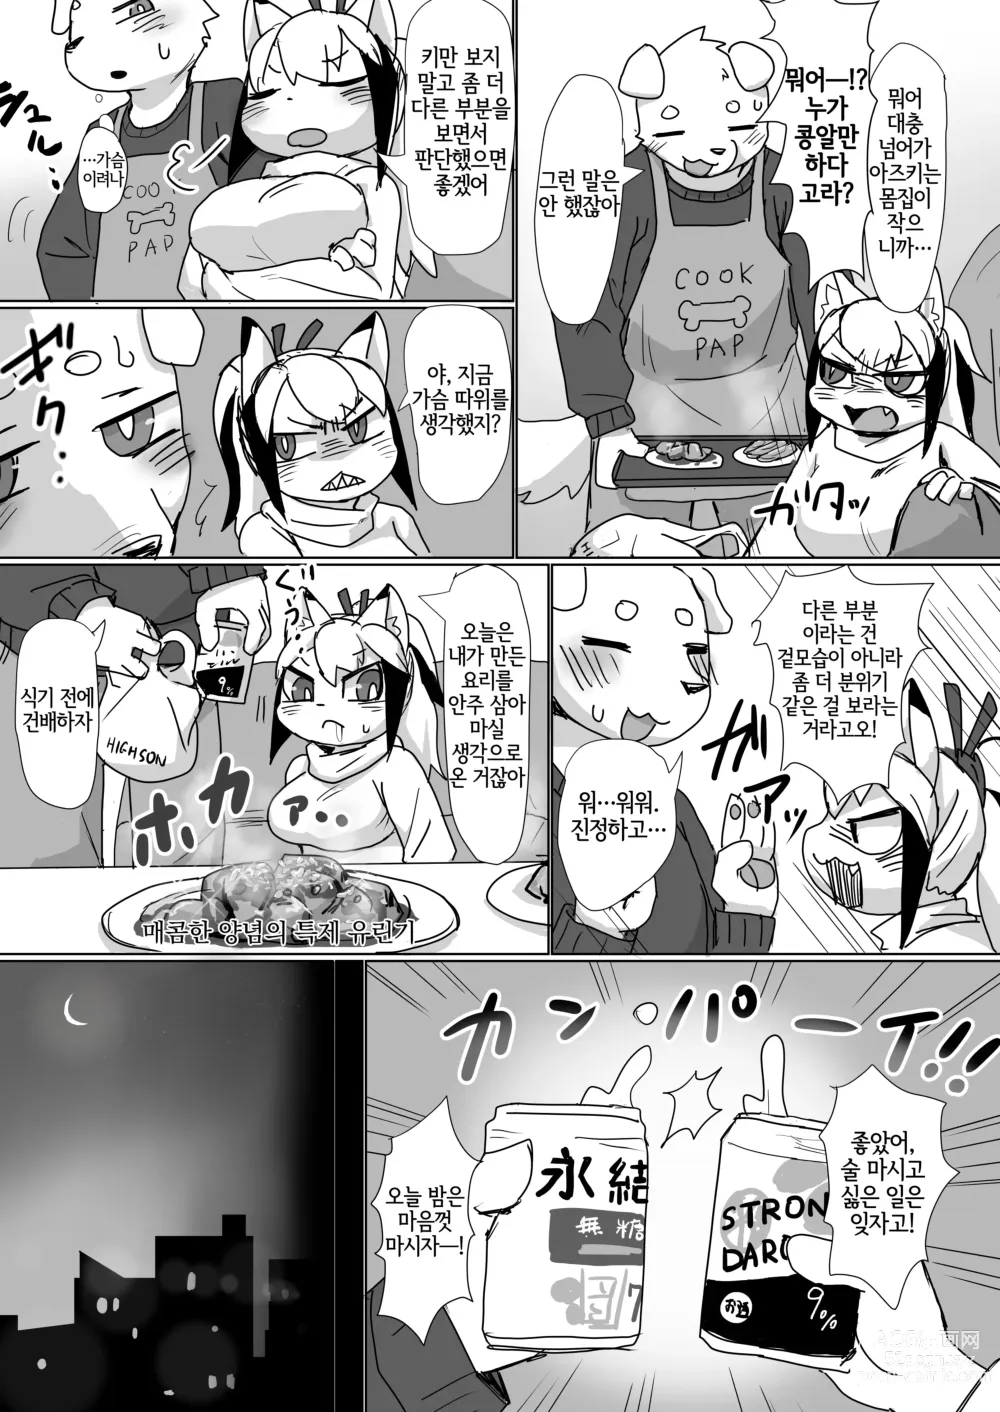 Page 4 of doujinshi 오늘 밤 평소의 술친구와